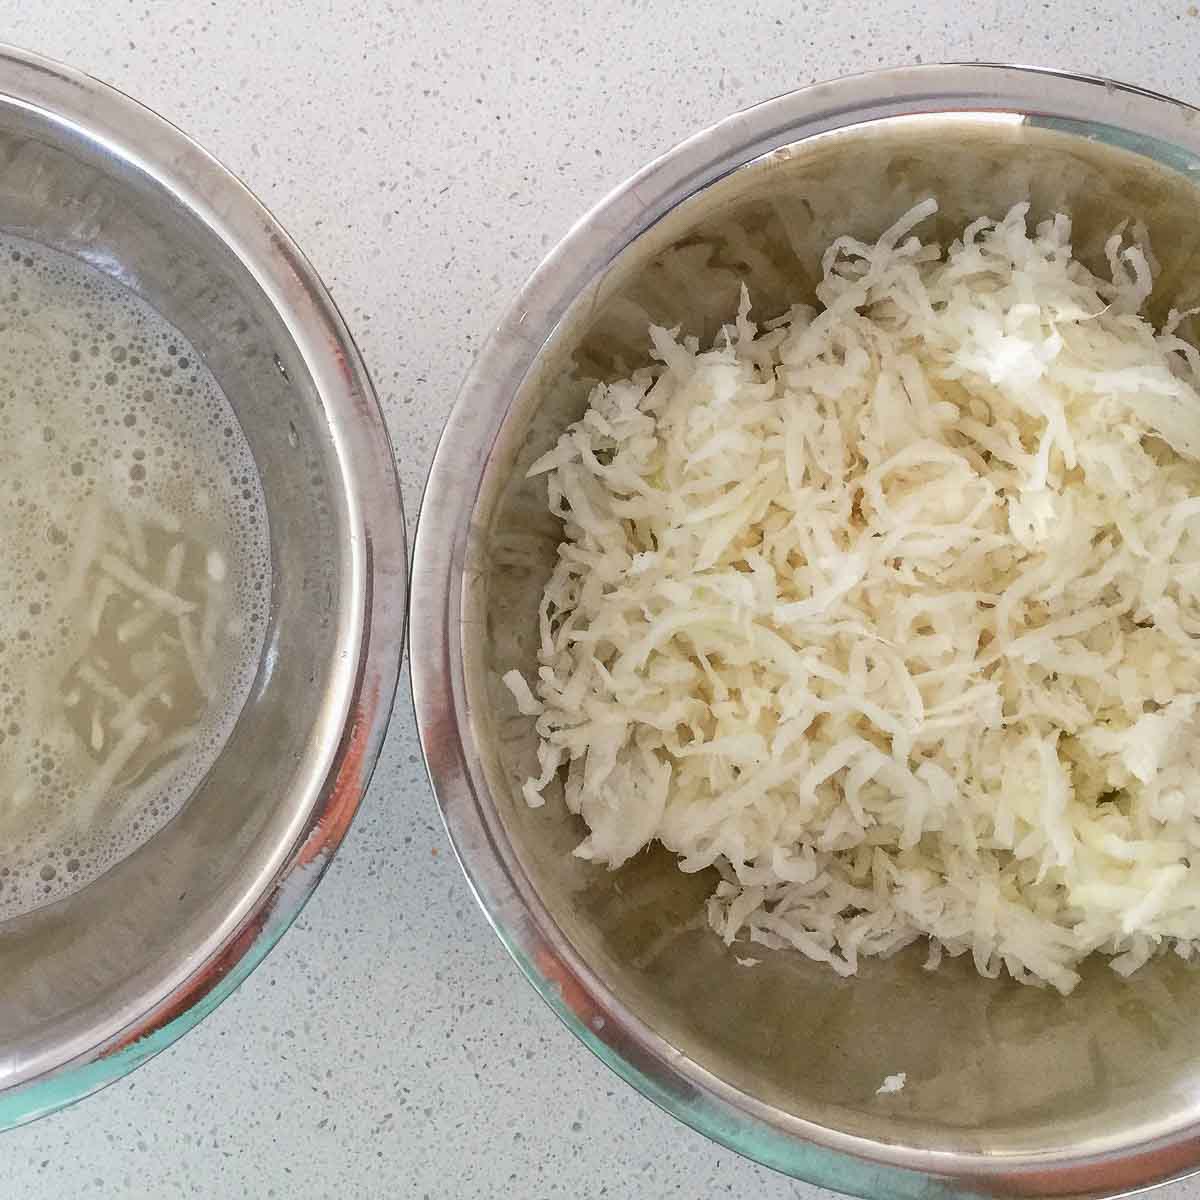 Soak grated radish in salt and squeeze out excess water.